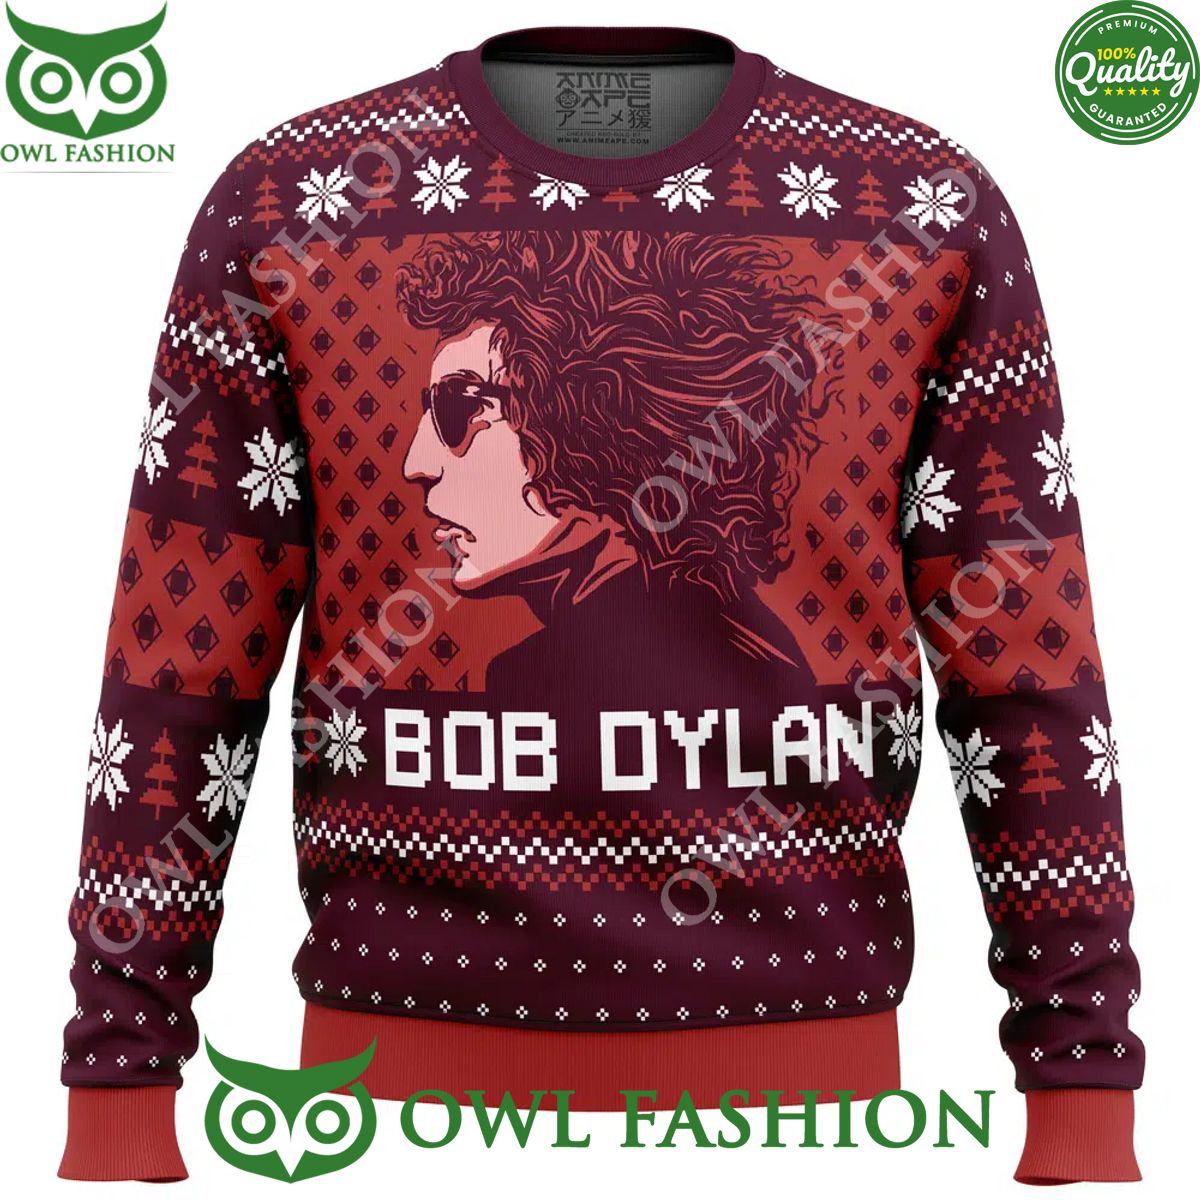 blood on the tracks bob dylan ugly christmas sweater jumper 1 D5GUc.jpg